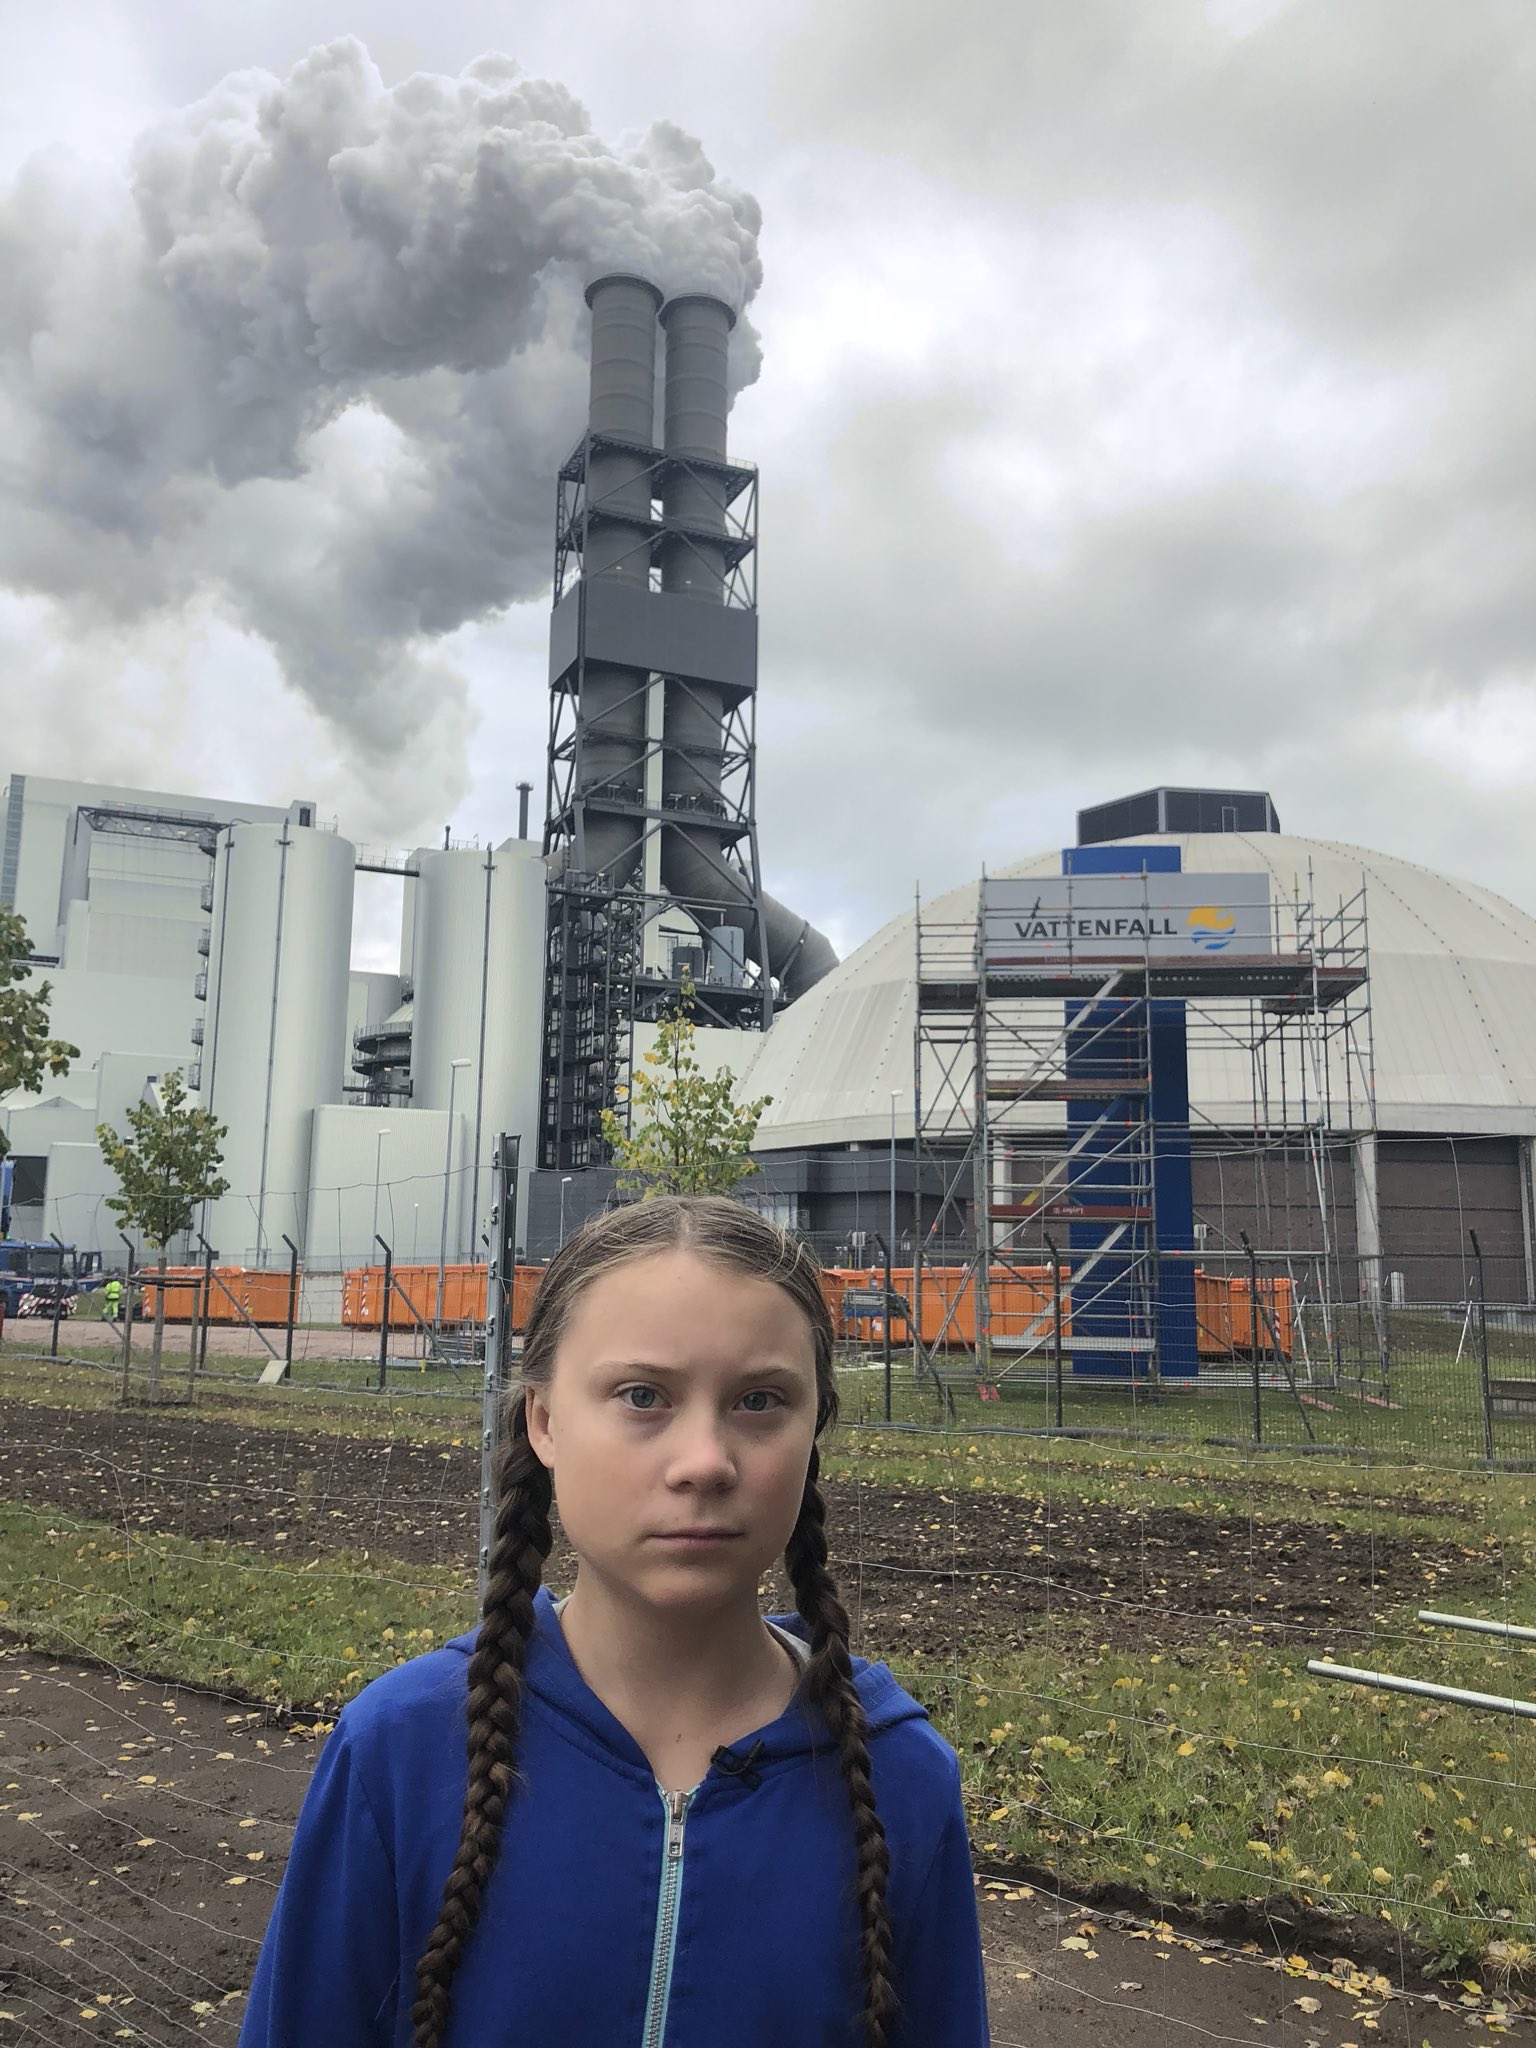 Greta Thunberg on Twitter: "On the pictures you can see me, in front of